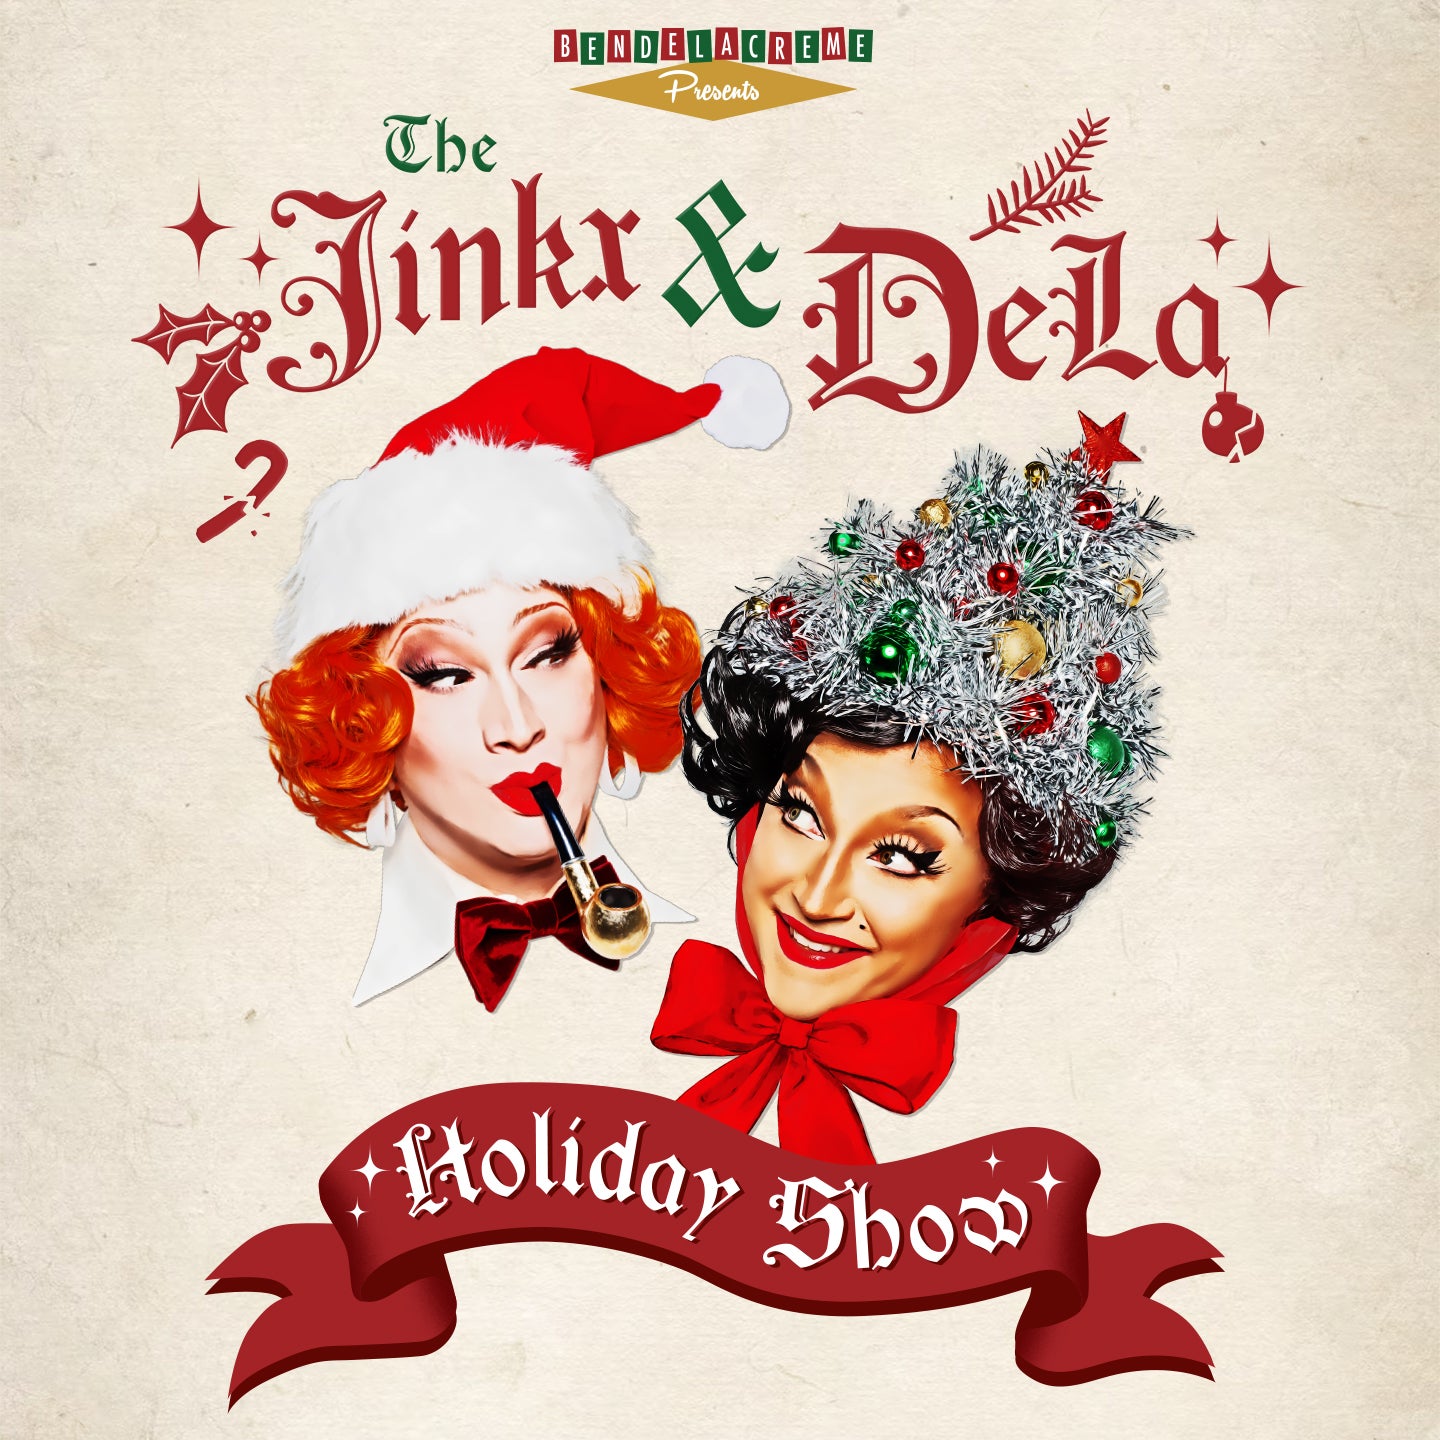 The Jinkx & DeLa Holiday Show (Intimate Preview Experience)